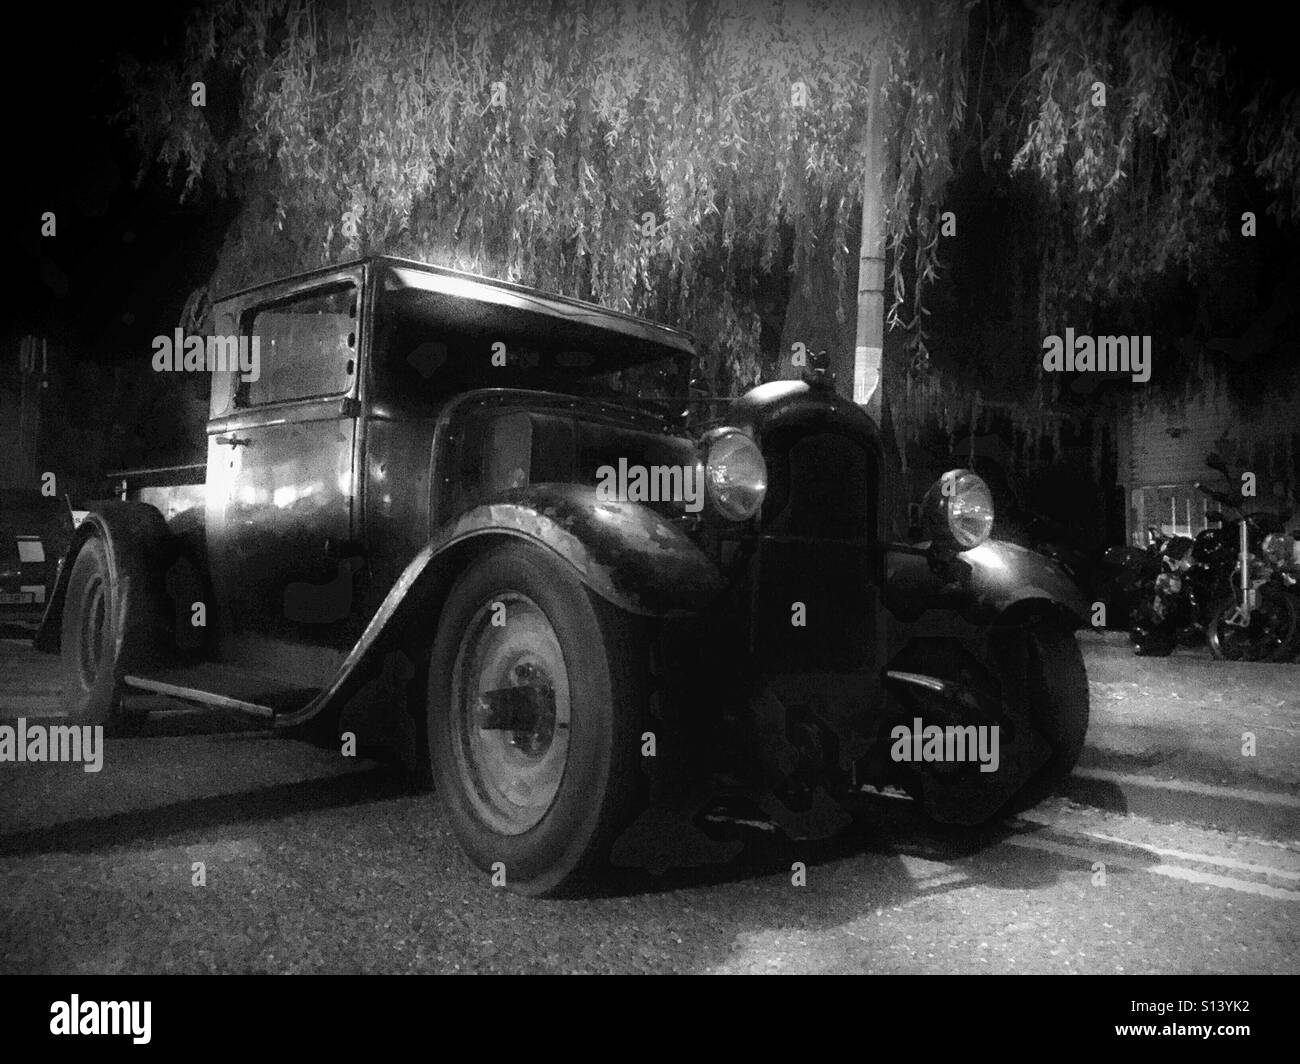 A classic American pick up truck under a tree at night. Stock Photo